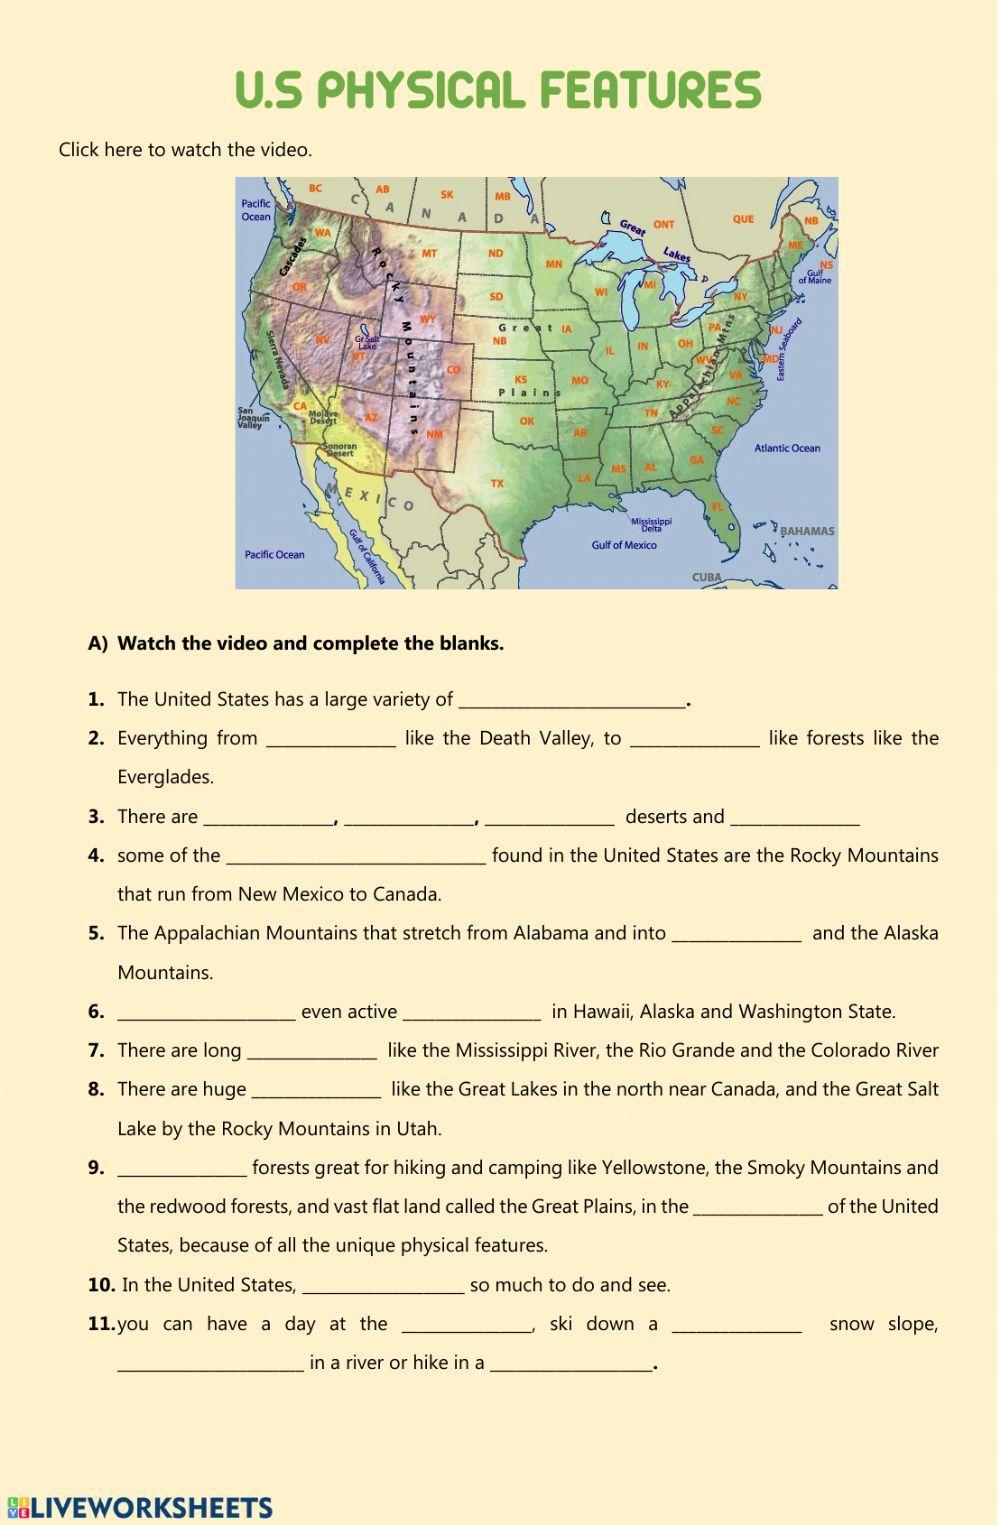 USA physical features - geographical features